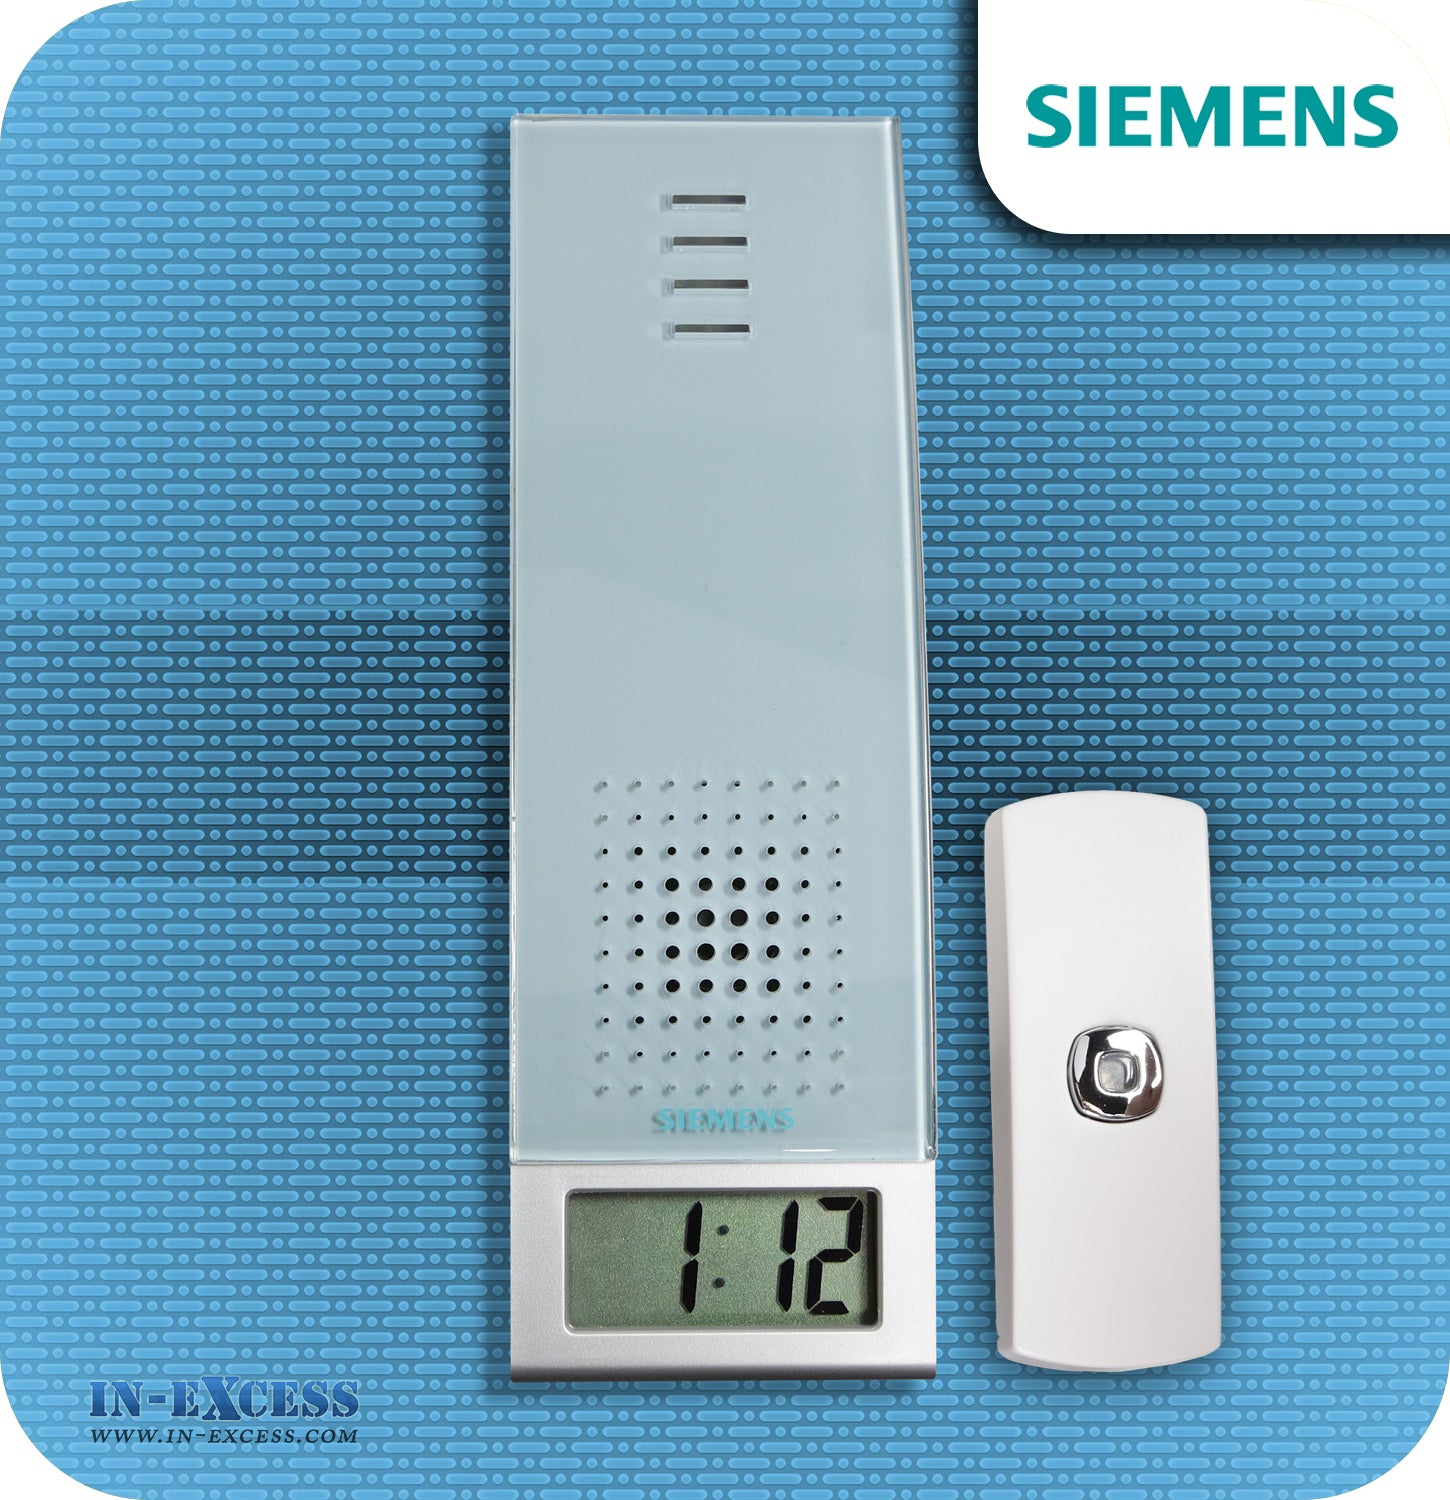 Siemens Azure Wirefree Portable Door Bell Chime Kit JSJS-216 - With JSJS-104W Bell Push